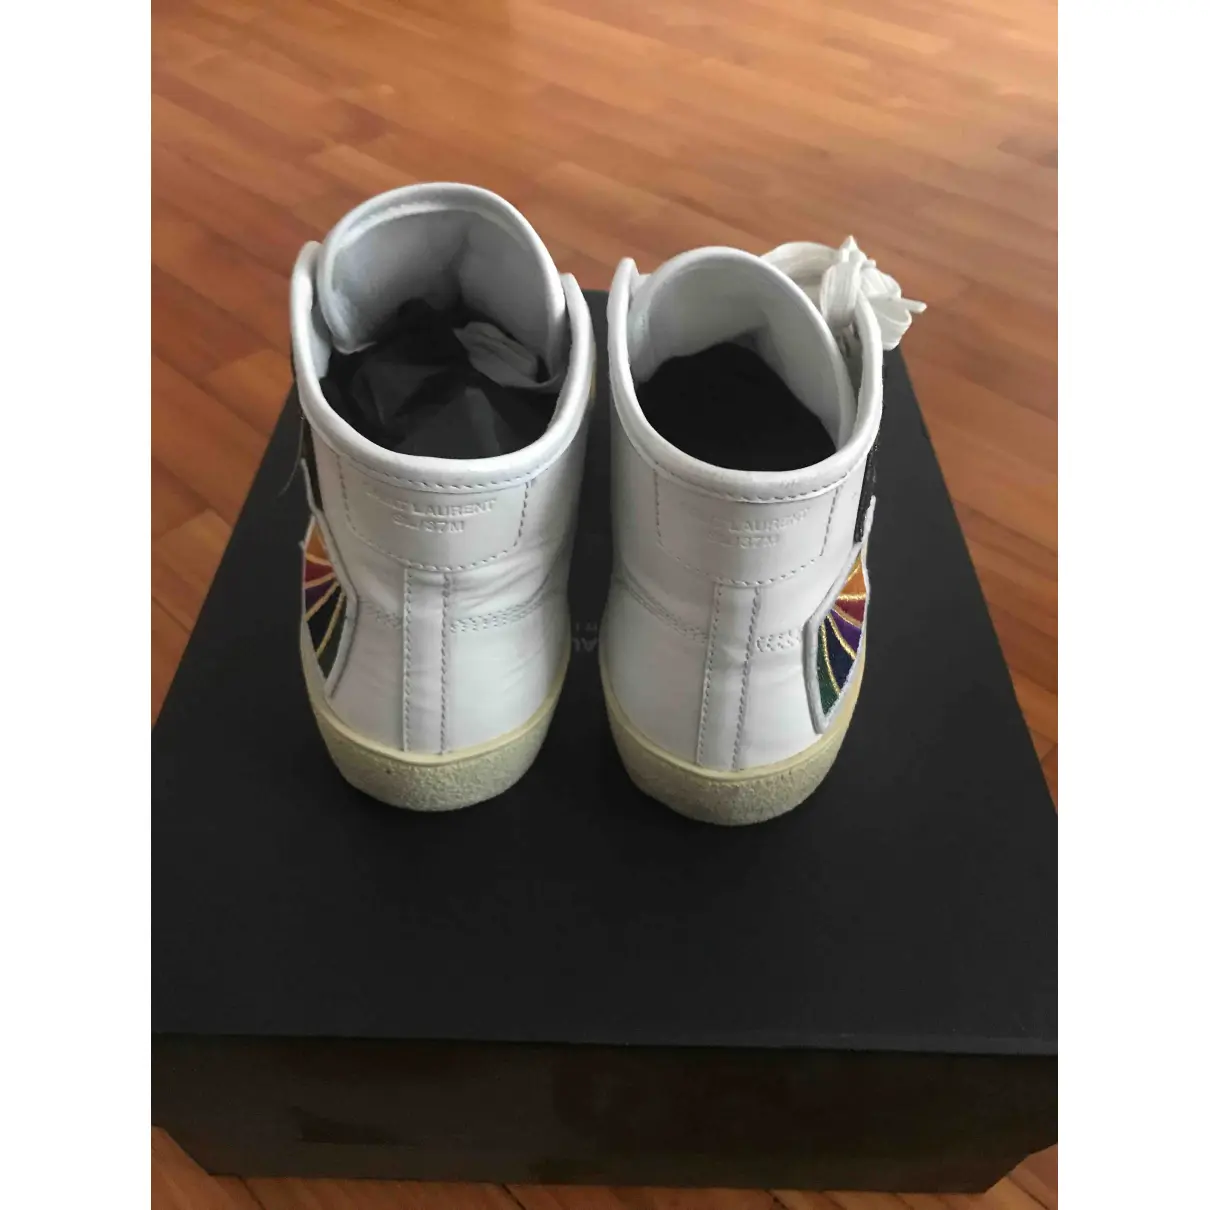 Bedford leather high trainers Saint Laurent